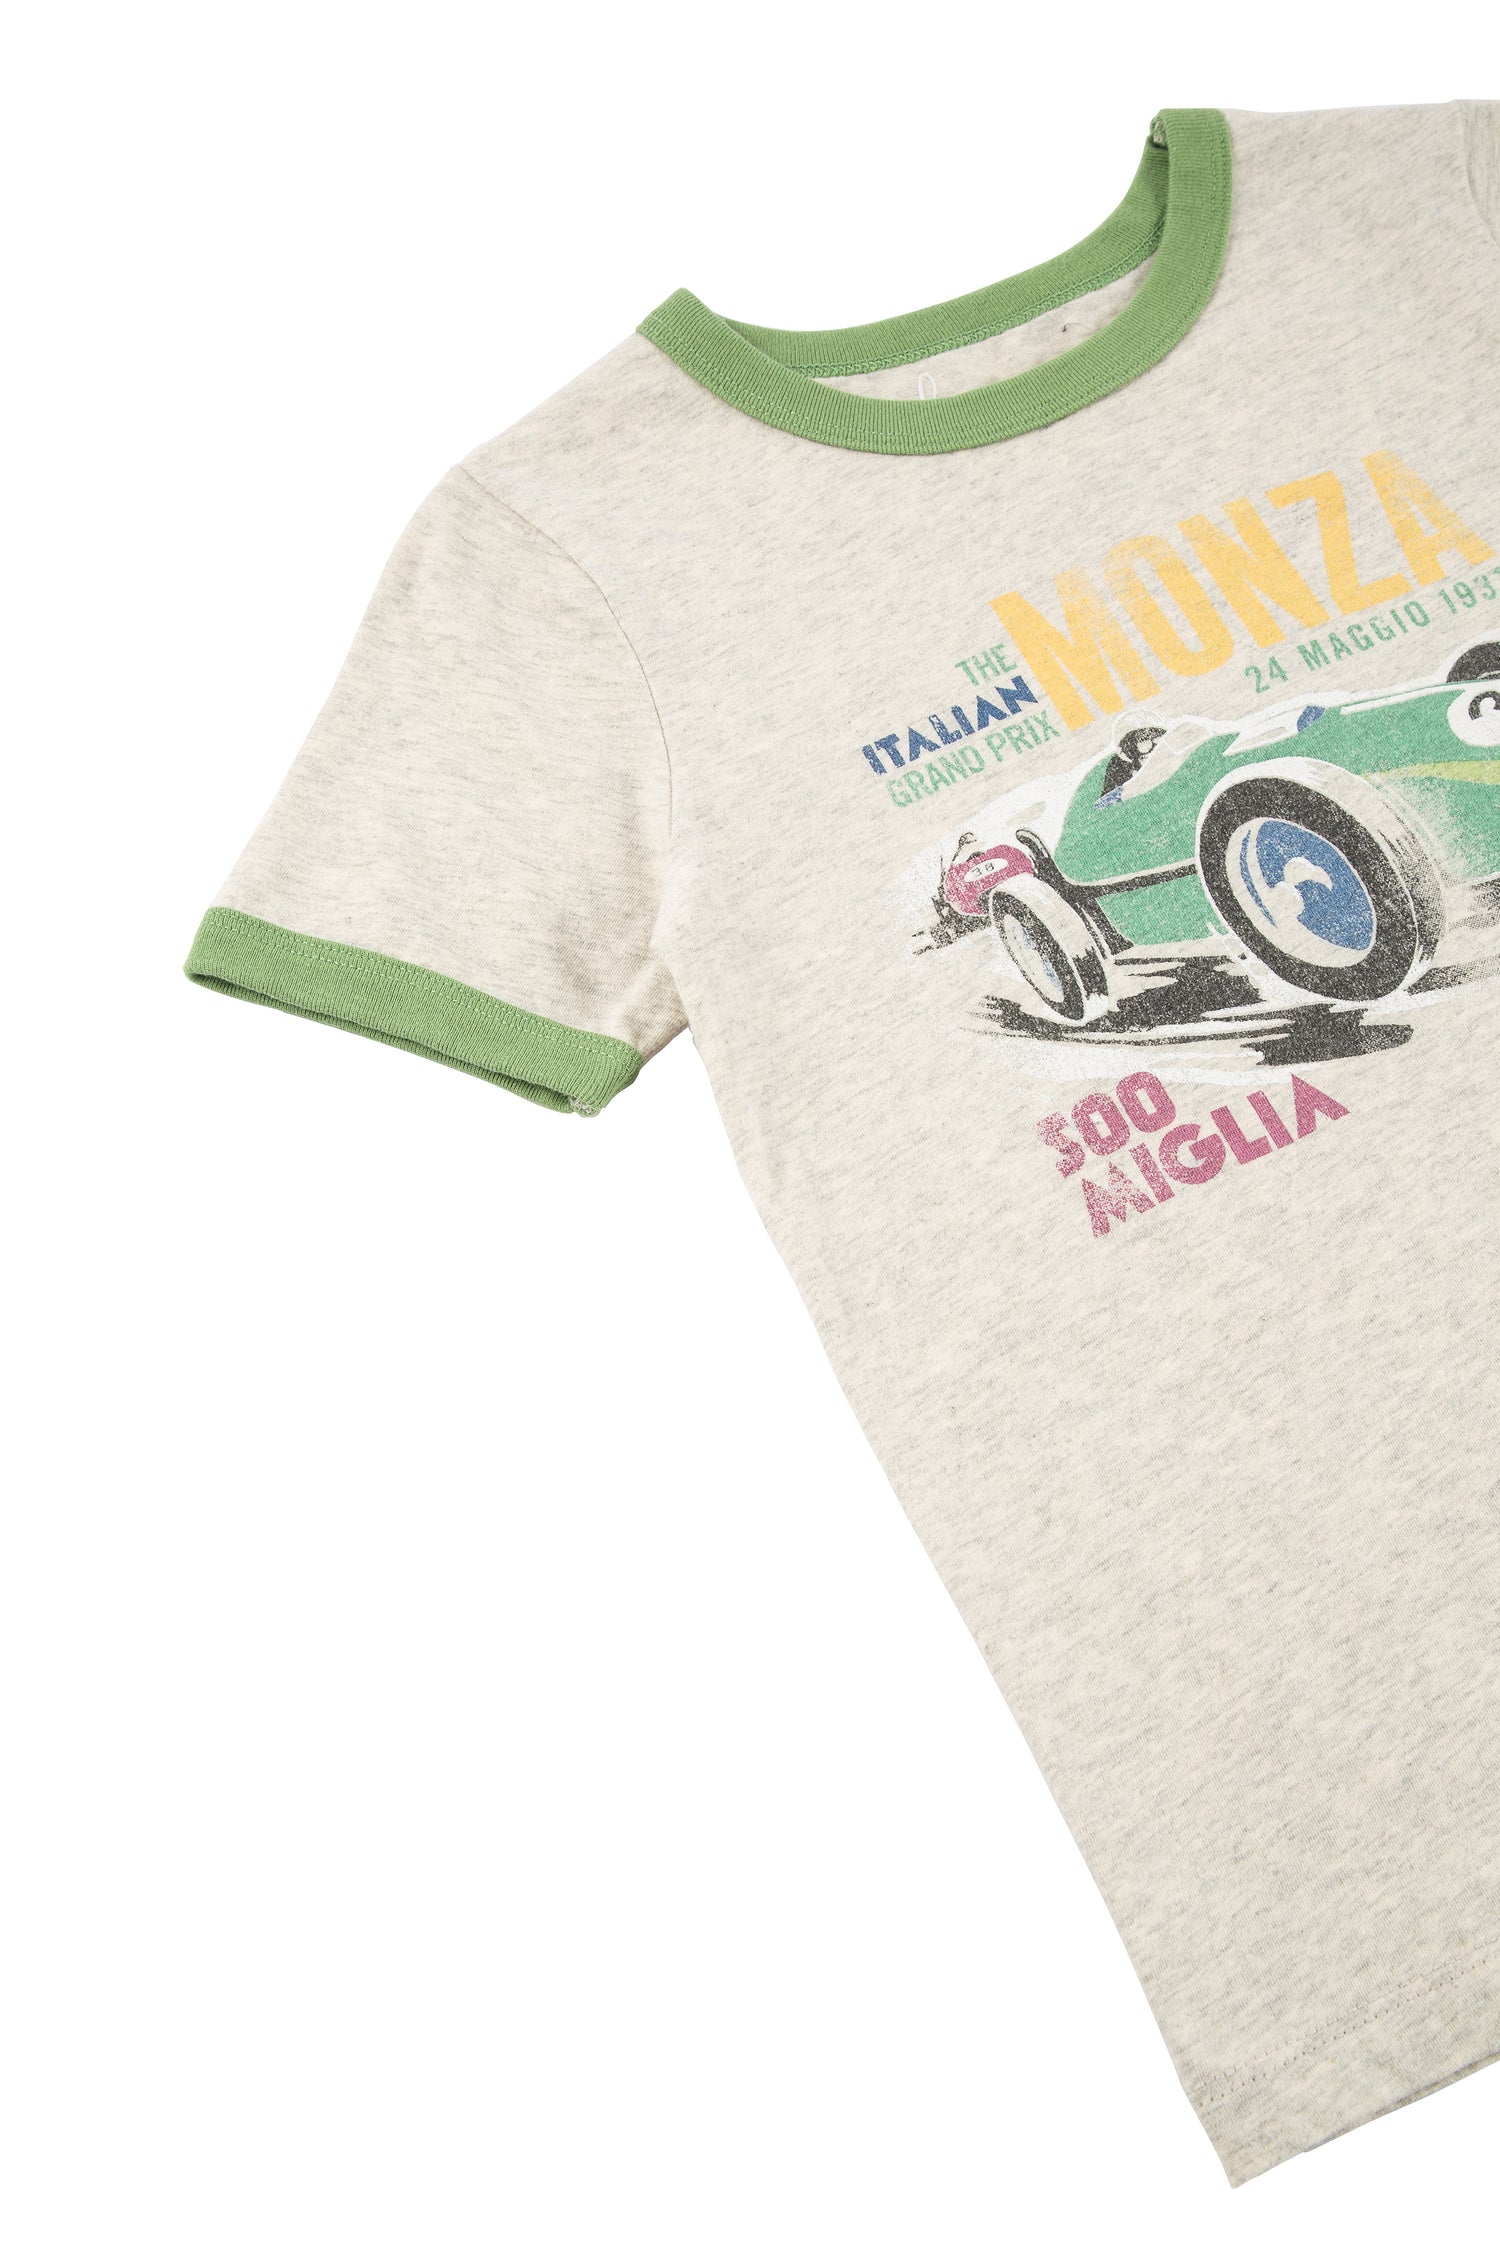 Close up of gray and green t-shirt with "Monza the Italian grand prix" text and illustrated racecar